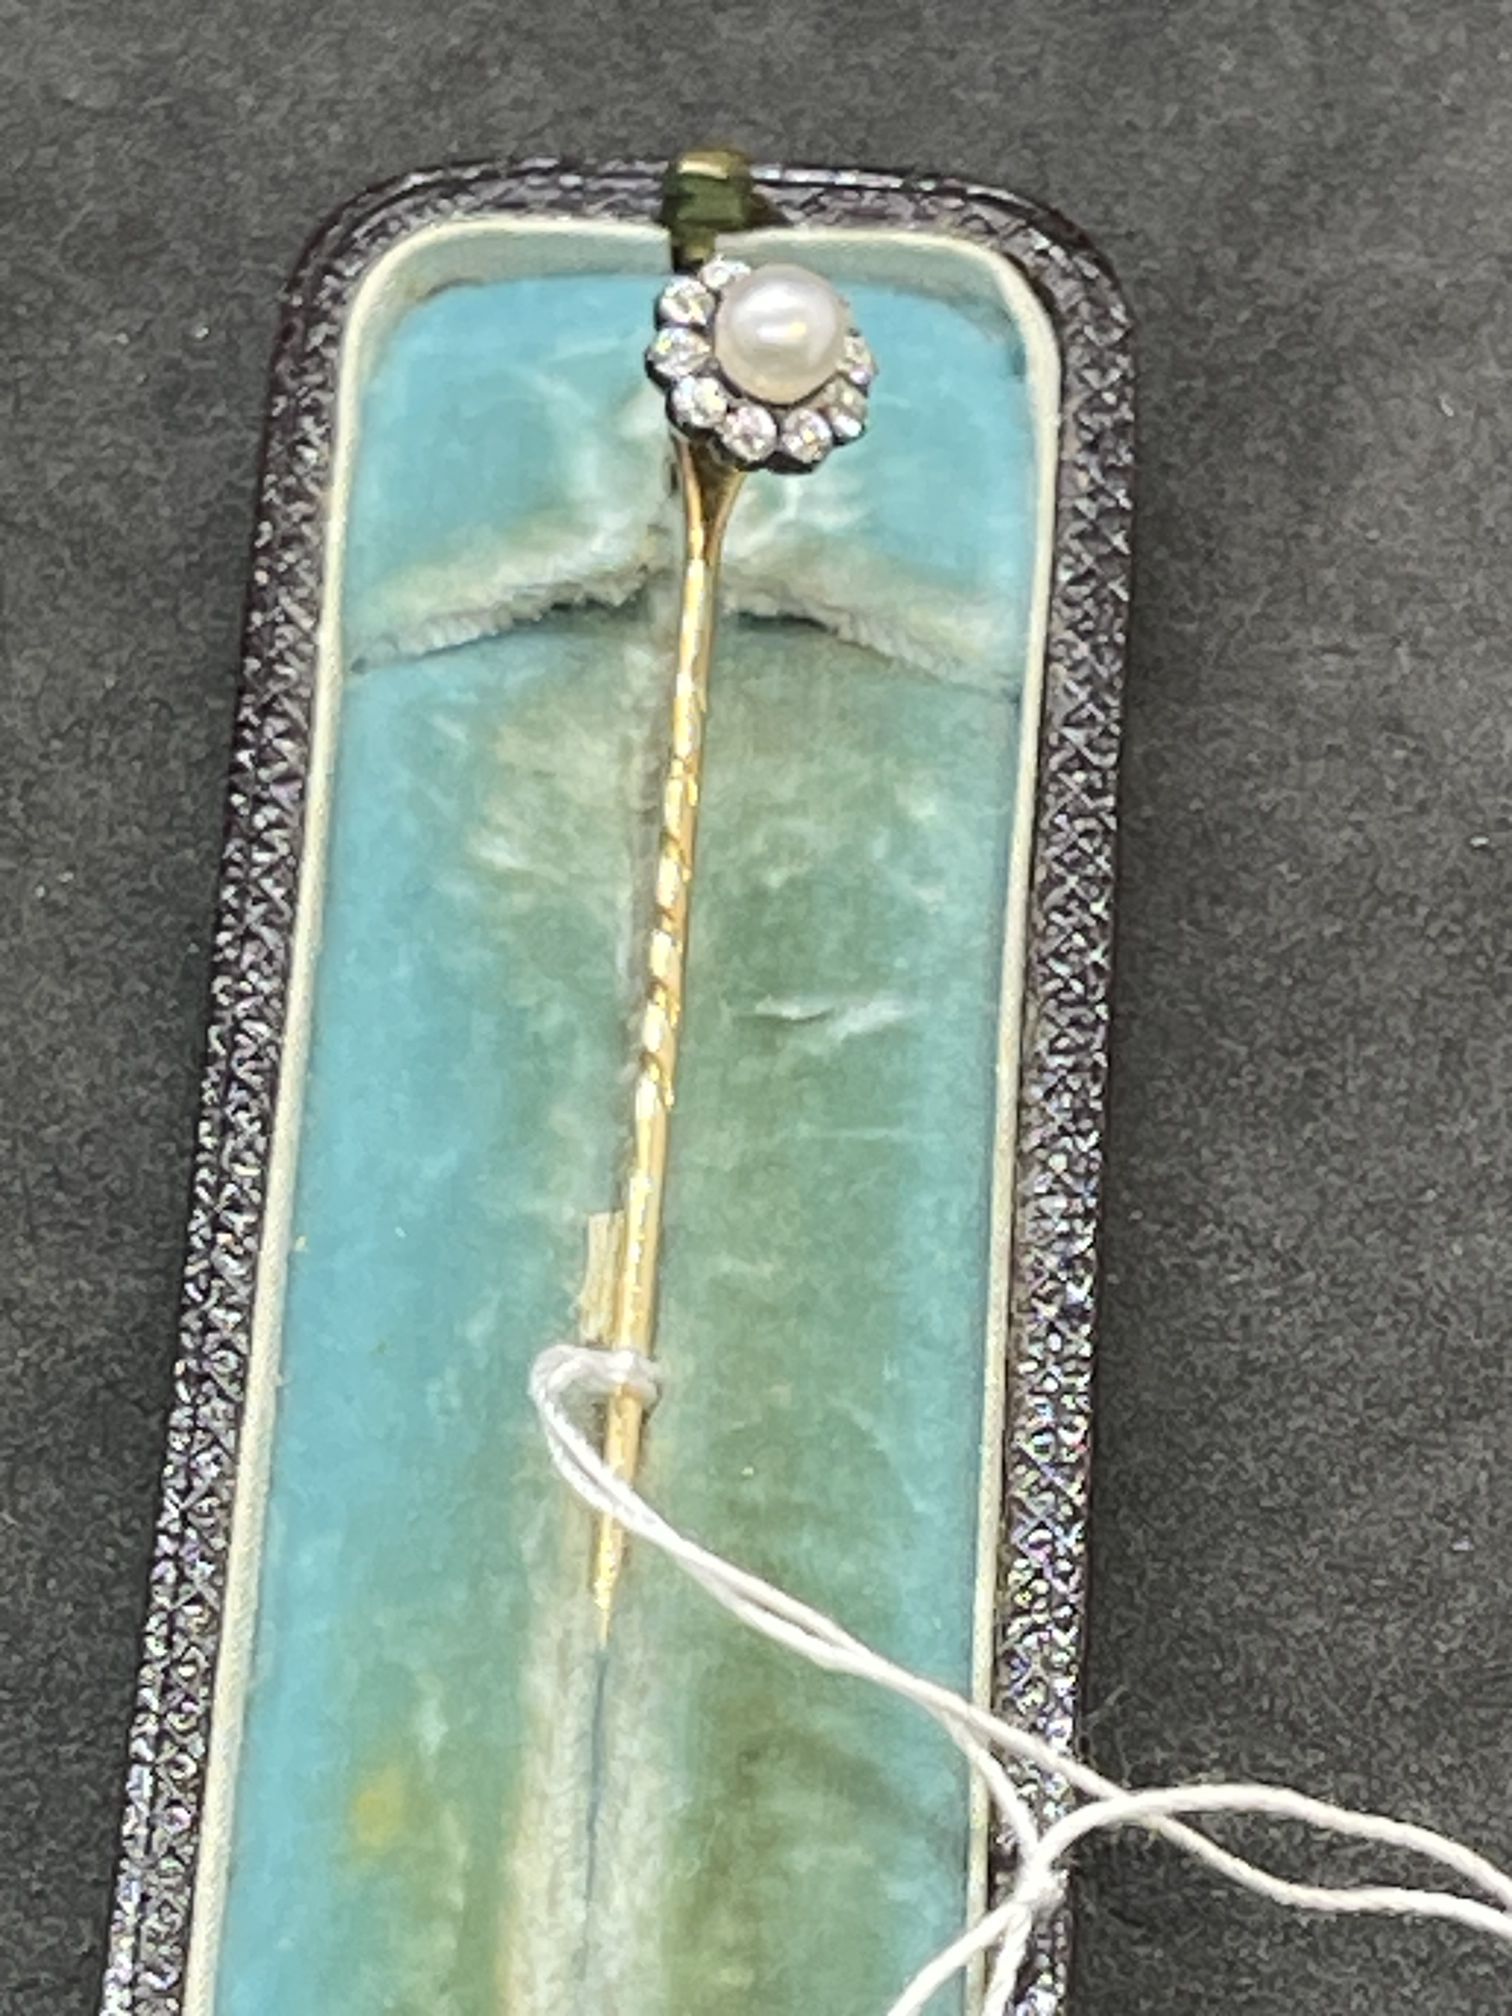 Jewellery: Early 20th century diamond and seed pearl tie pin.